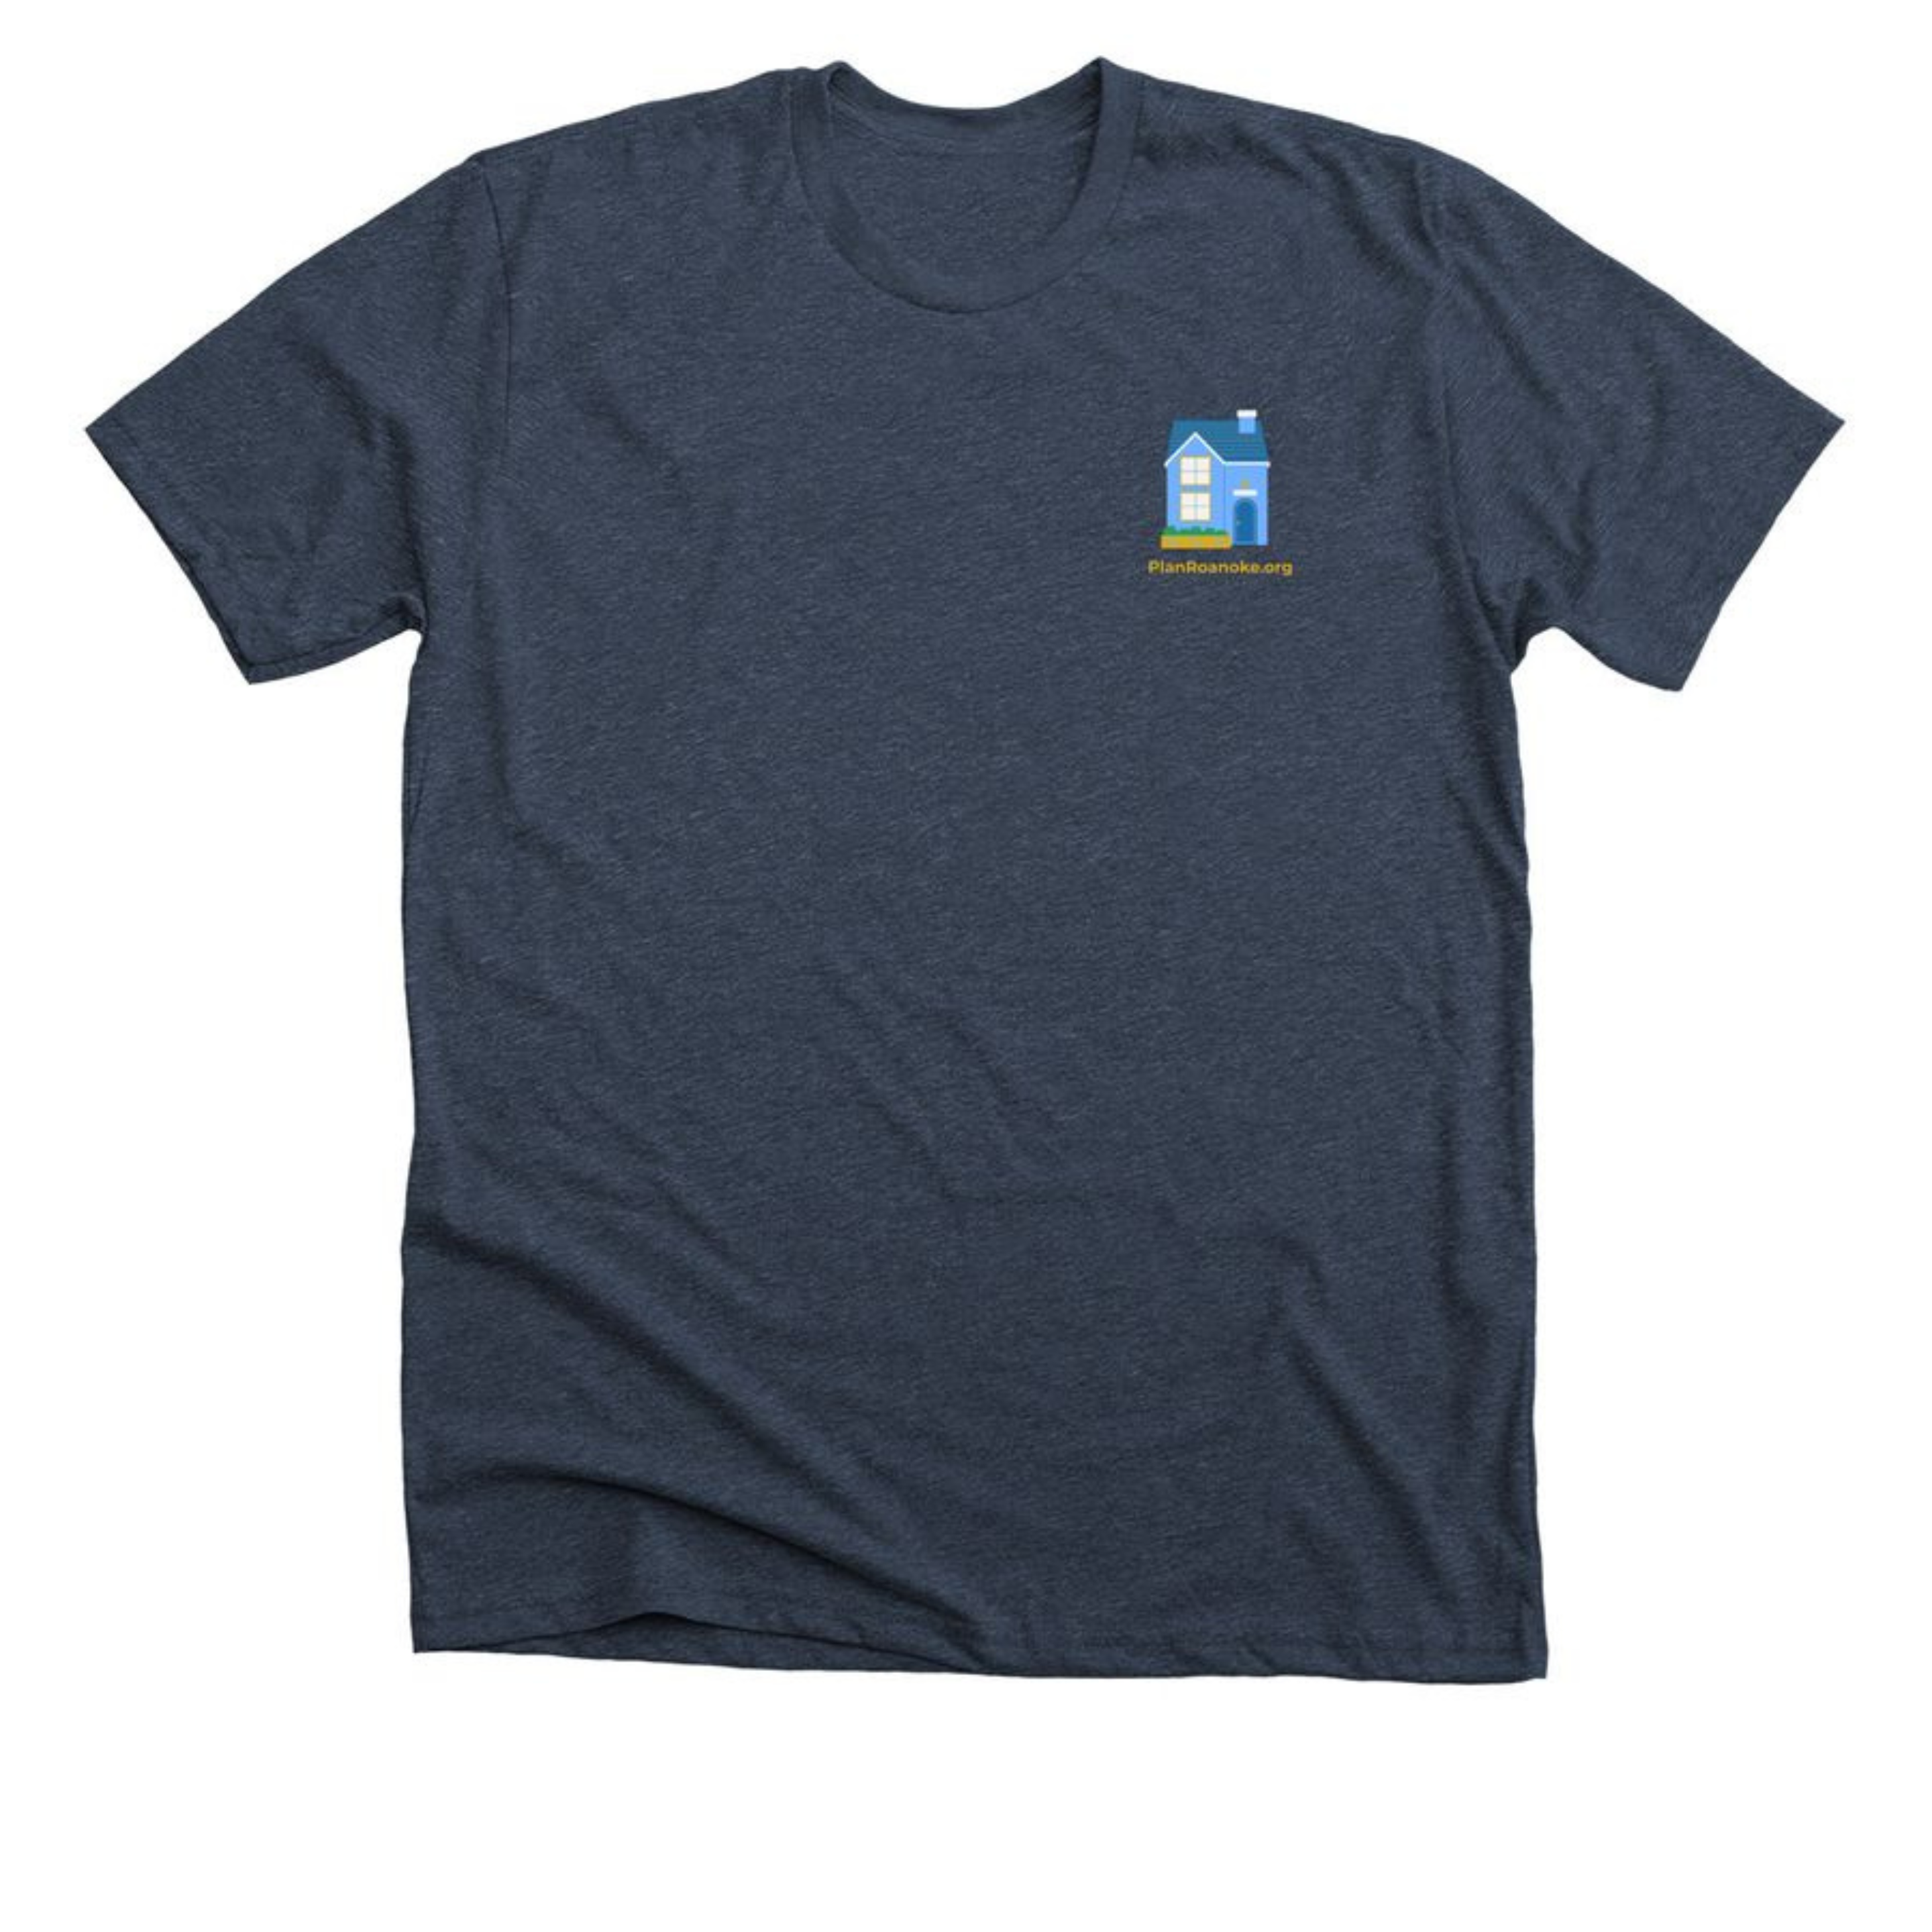 Navy blue t-shirt. The upper left chest area includes a design of a blue house with planroanoke.org written beneath it